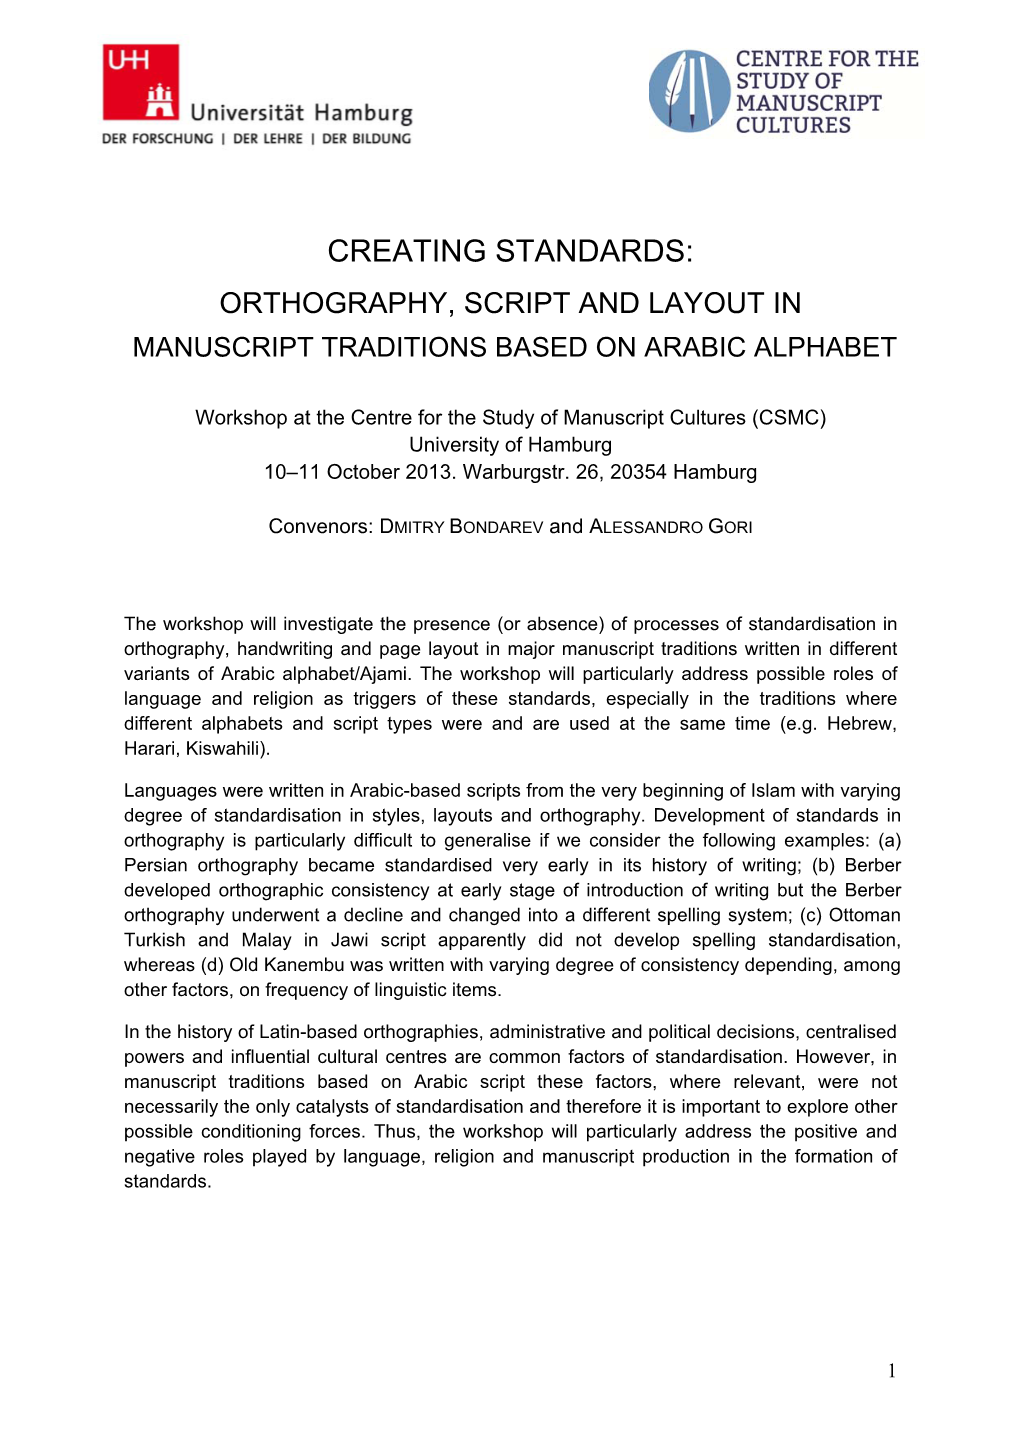 Creating Standards: Orthography, Script and Layout in Manuscript Traditions Based on Arabic Alphabet